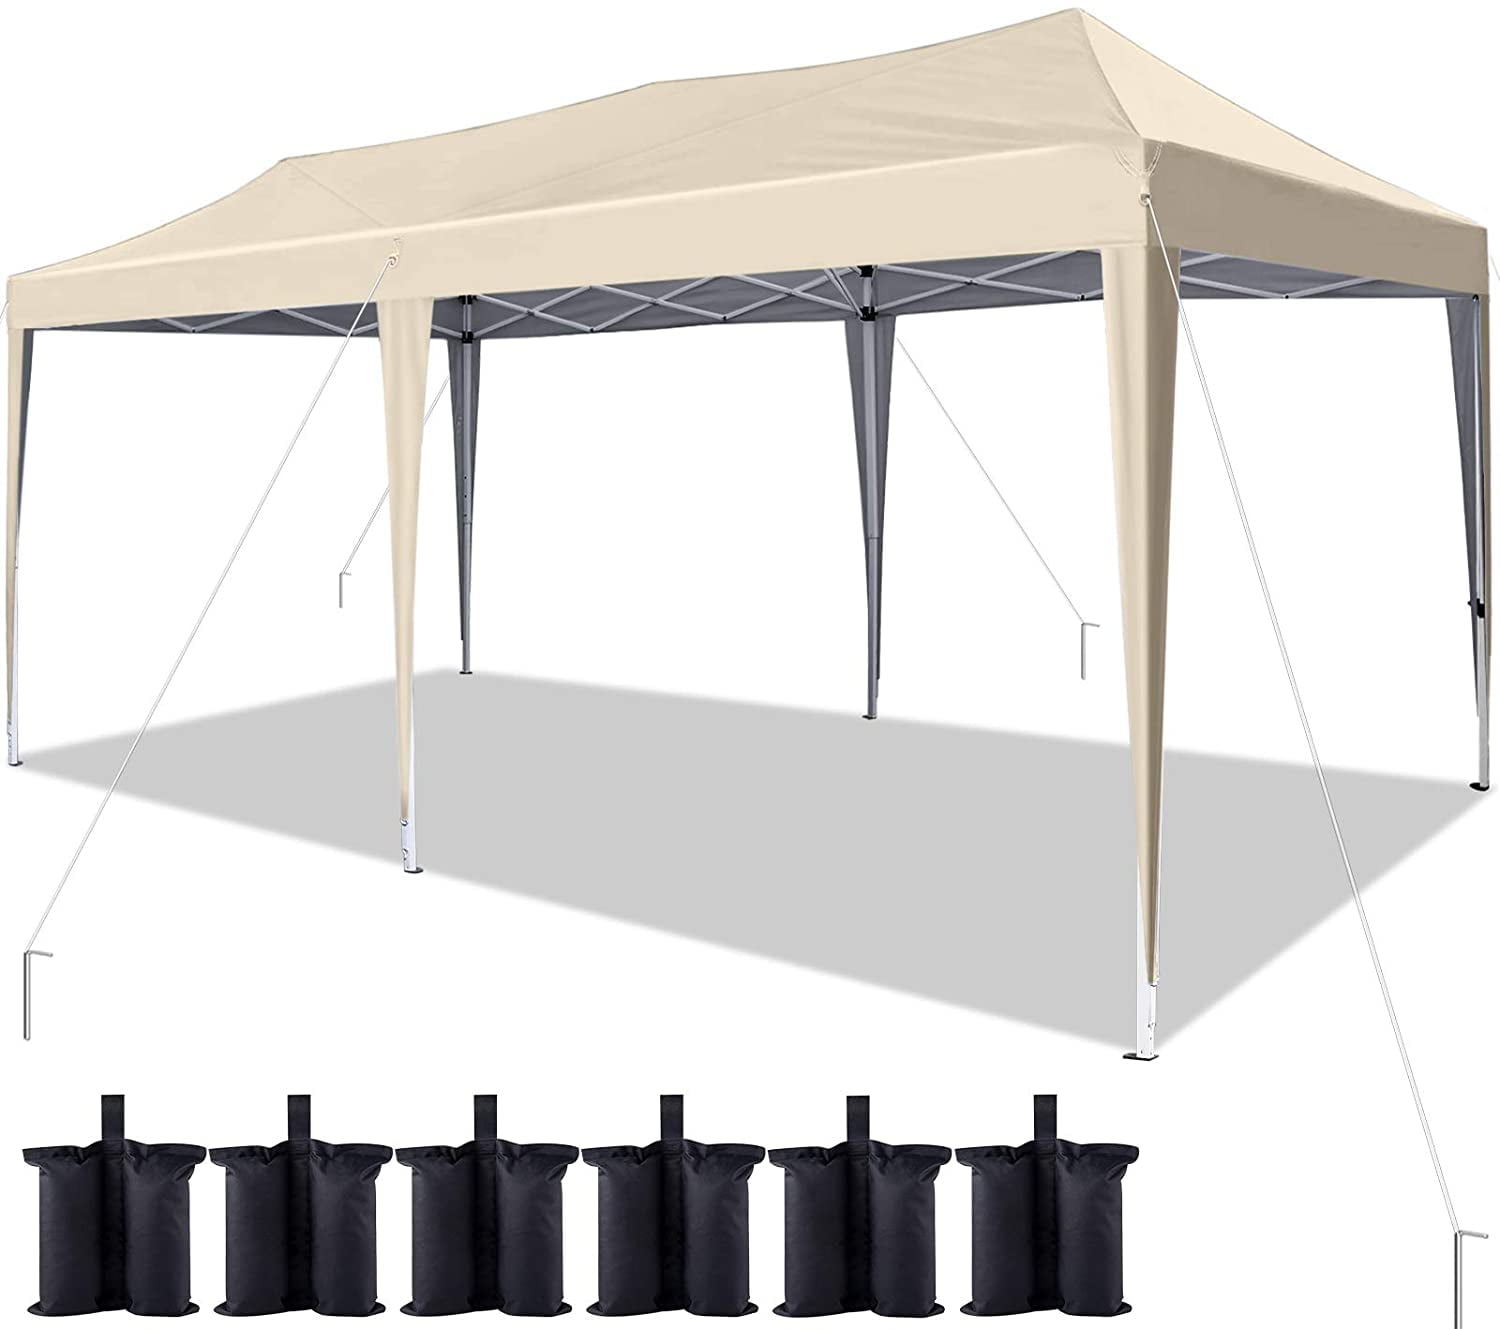 1Pcs Canopy Side Wall Gazebo Shelter Sunshade For 10x20ft EZ Party Tent Outdoor 